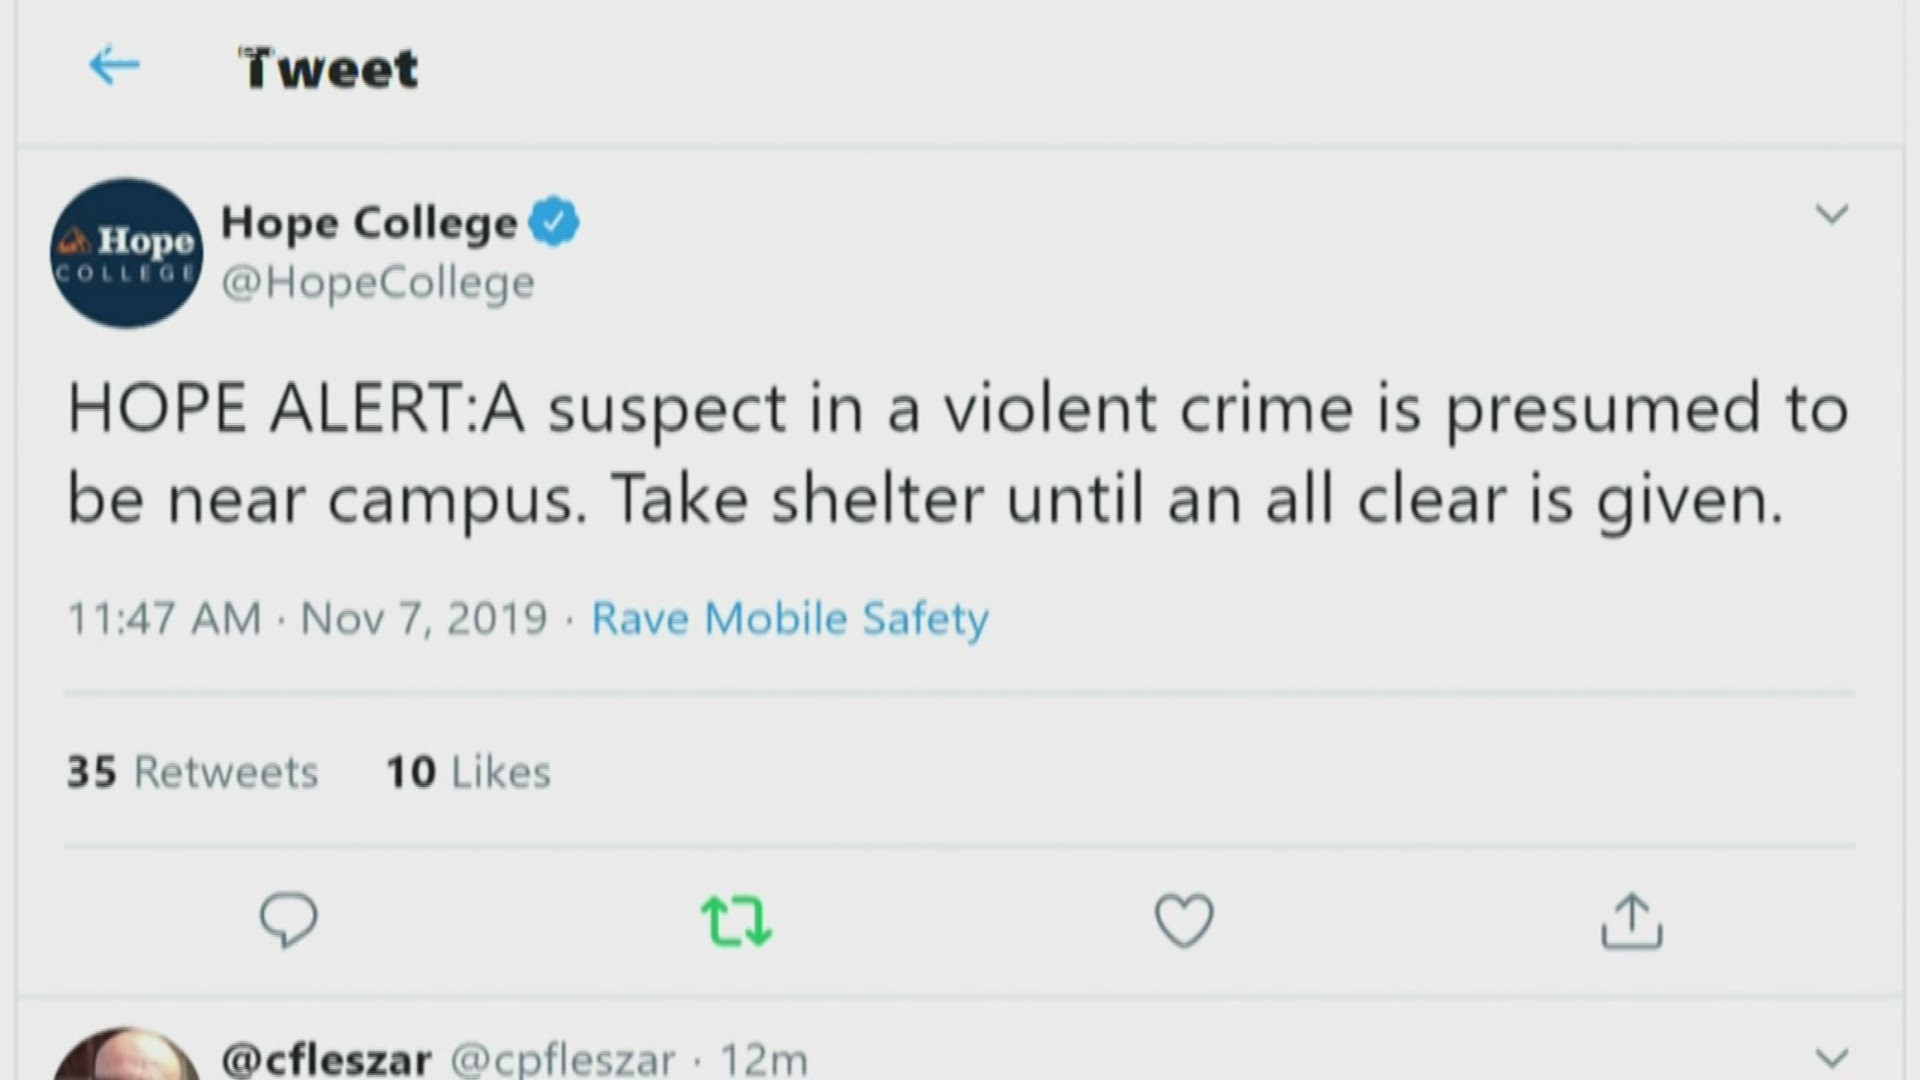 Students and staff were told to take shelter until an all clear was given.